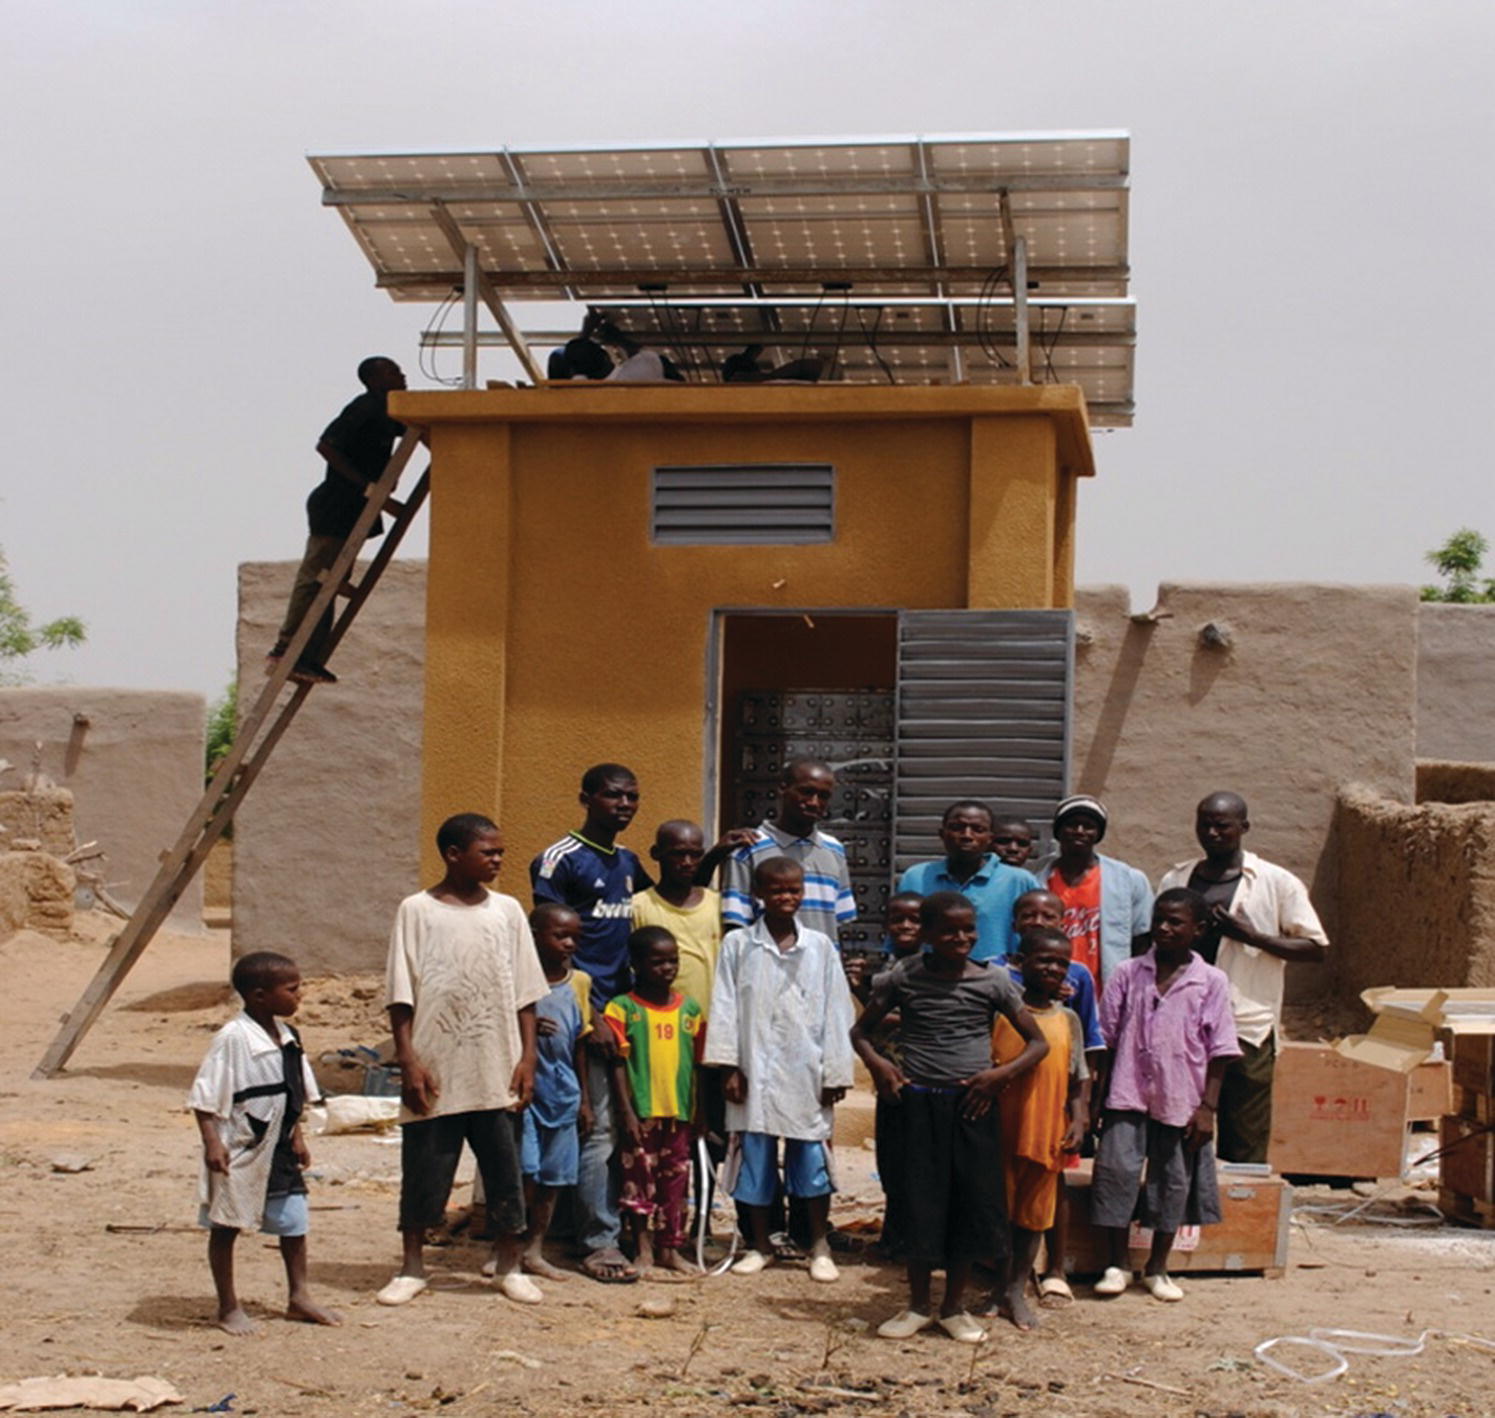 A group of people standing in front of the sharedsolar mini‐grid installation during construction phase.